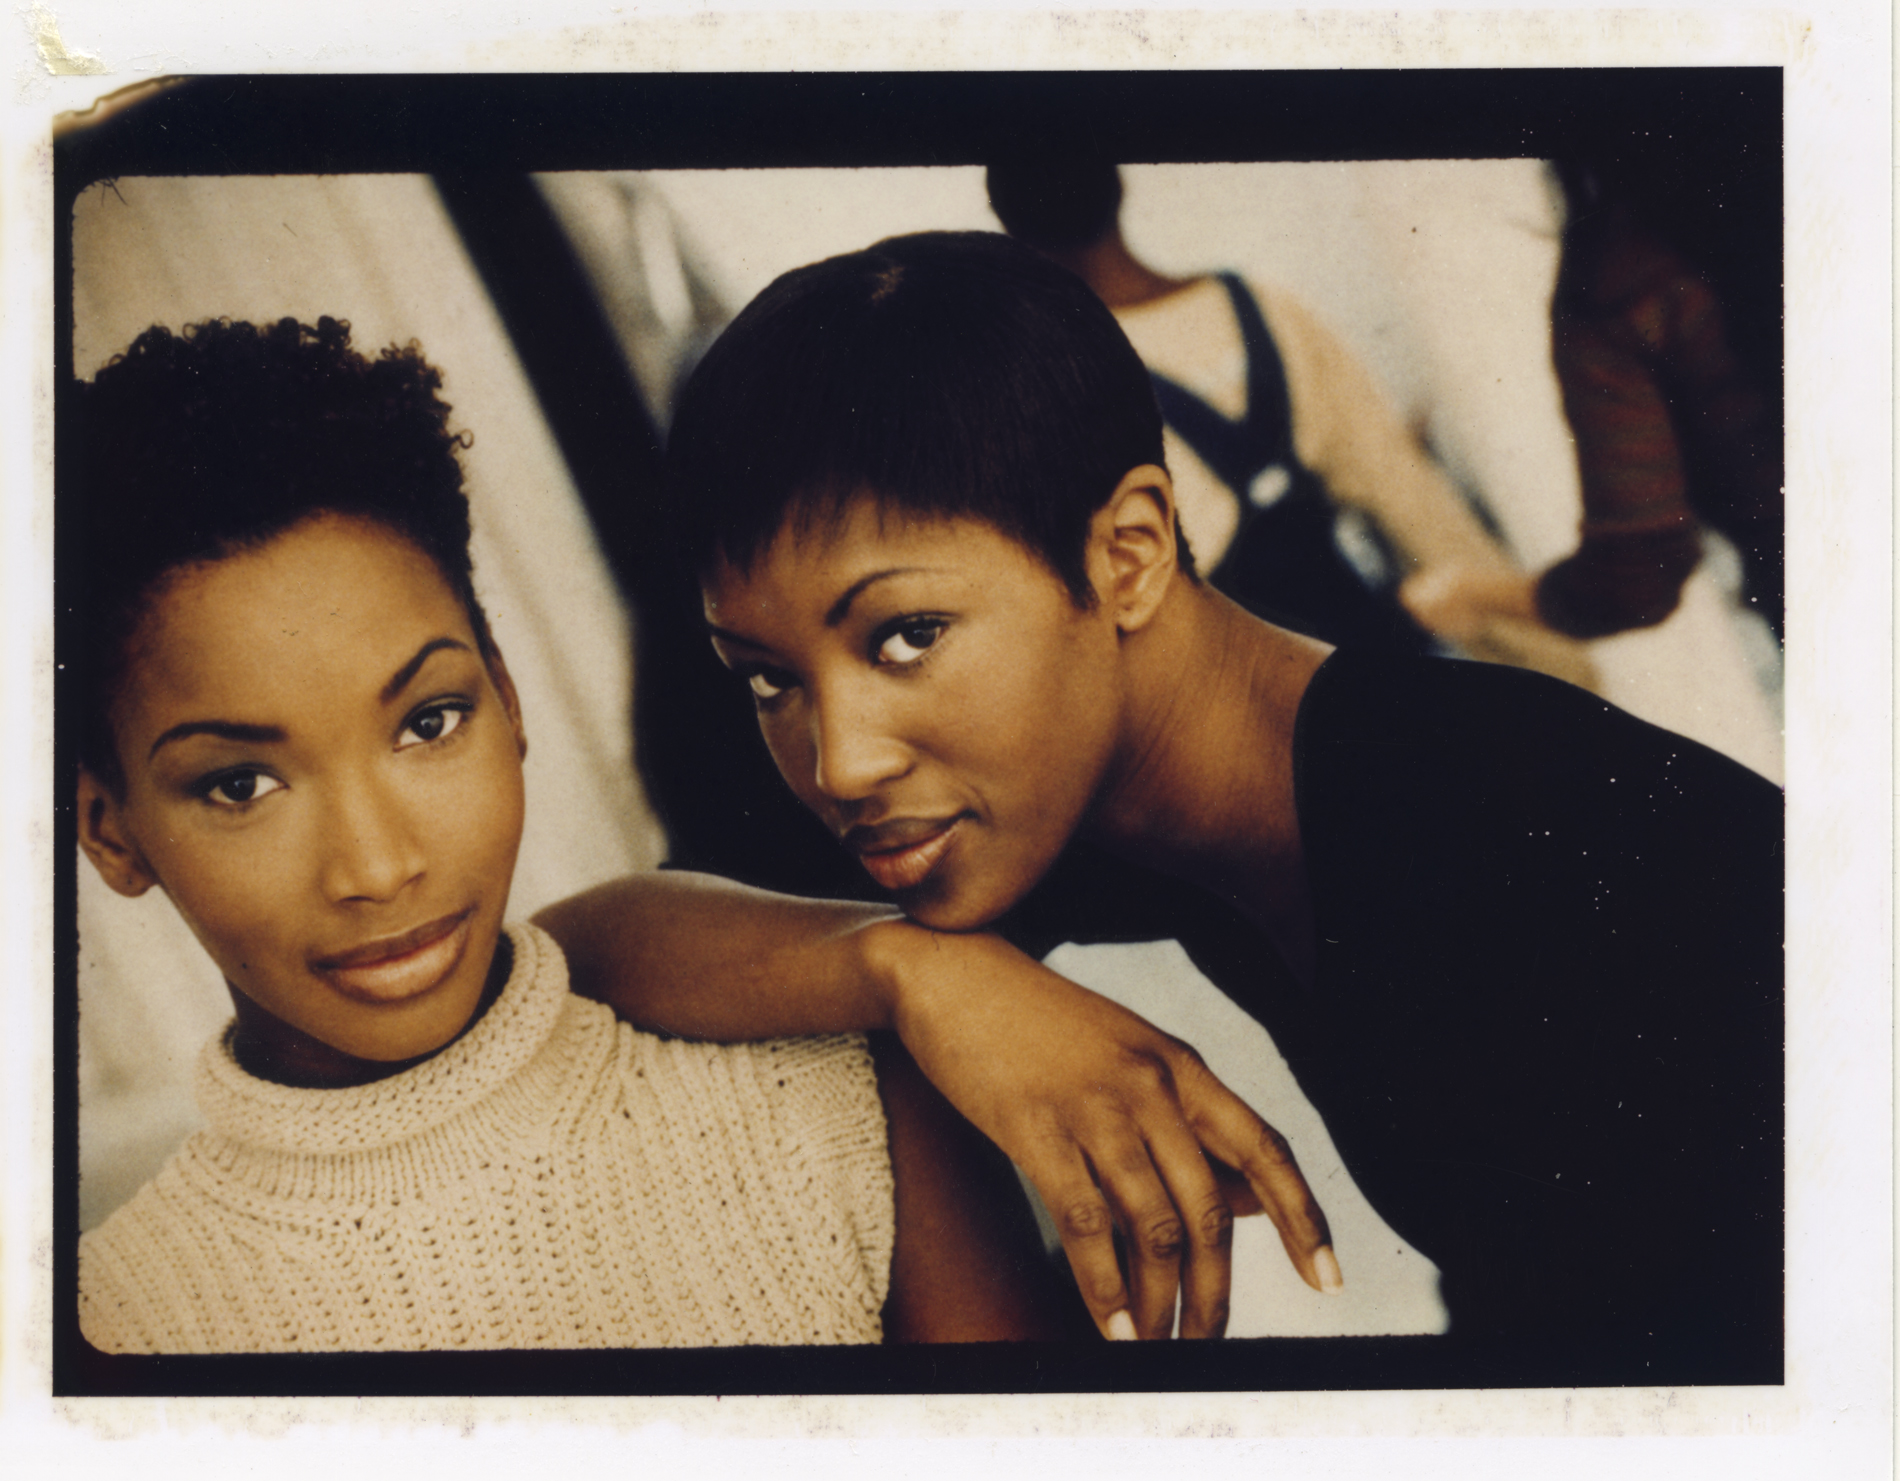 Beverly Peele and Naomi Campbell posing together by arthur elgort 1993